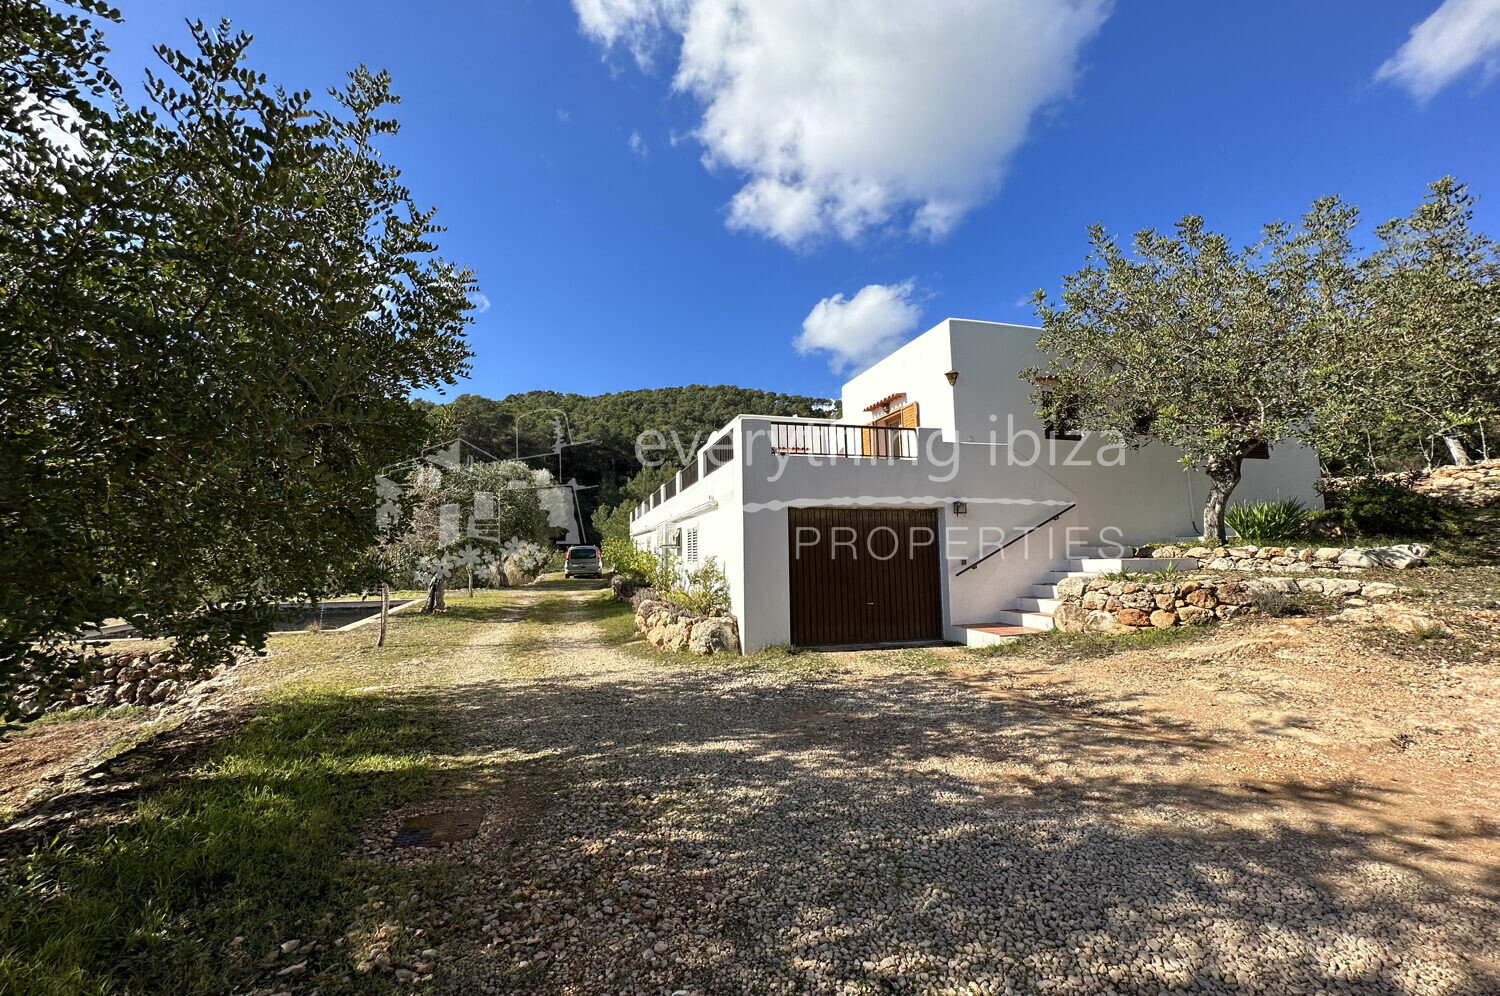 Elegant Traditionally Styled Villa on Large Fertile Plot with Views, ref. 1534, for sale in Ibiza by everything ibiza Properties